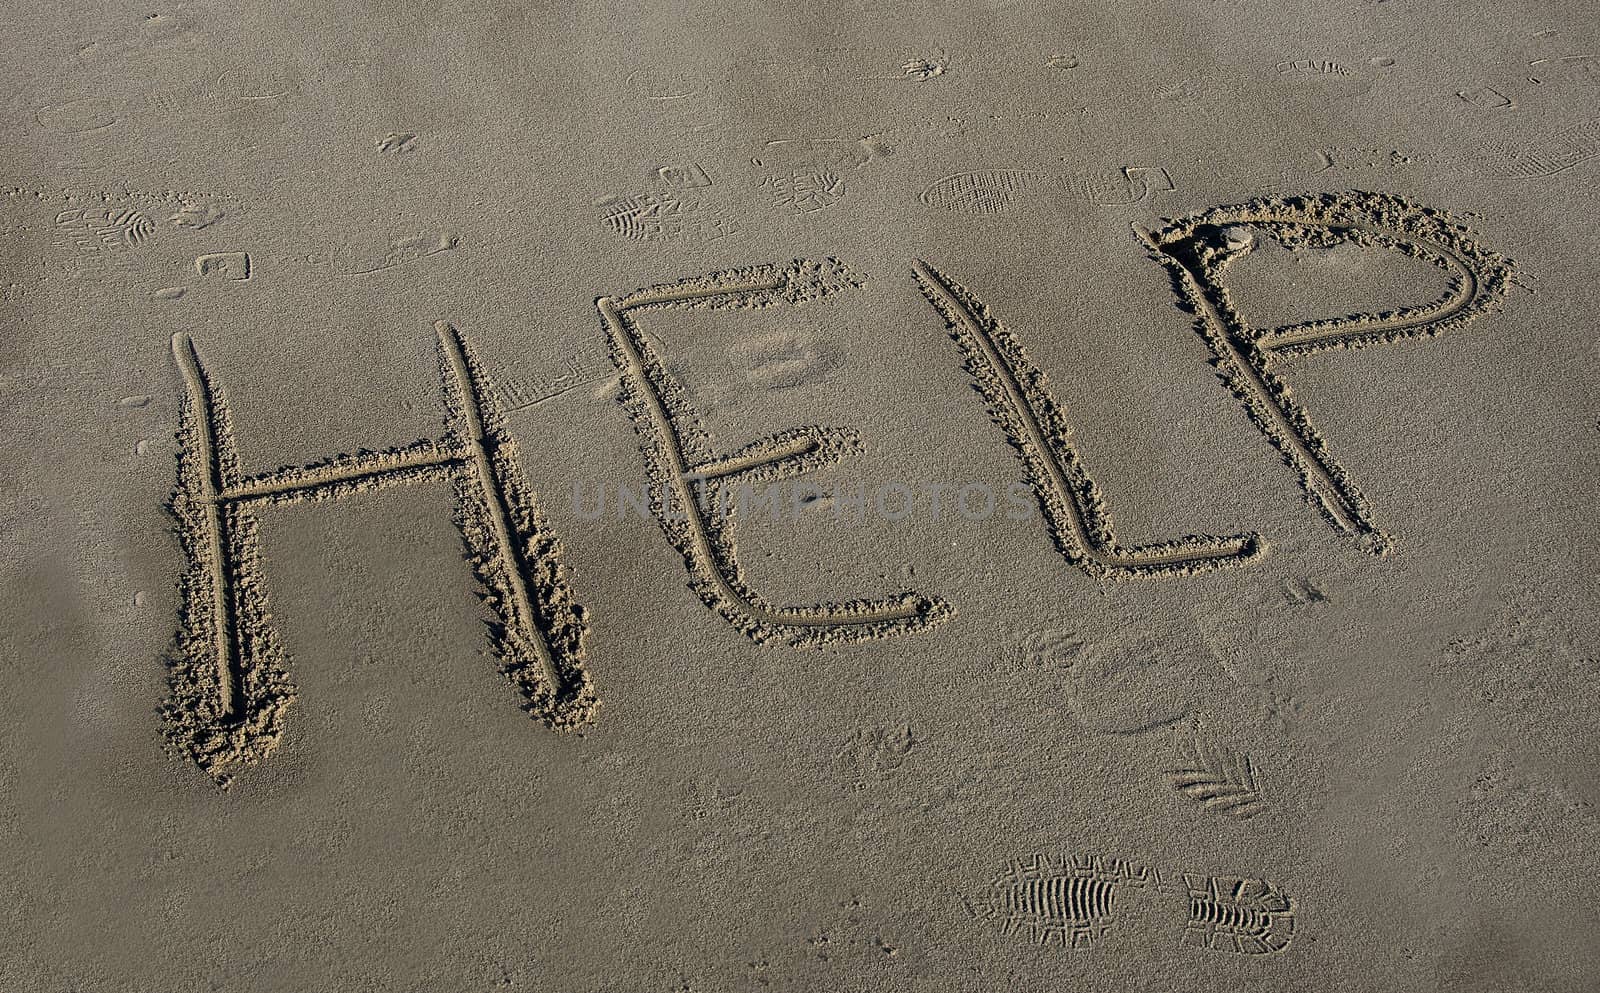 help in the sand by compuinfoto